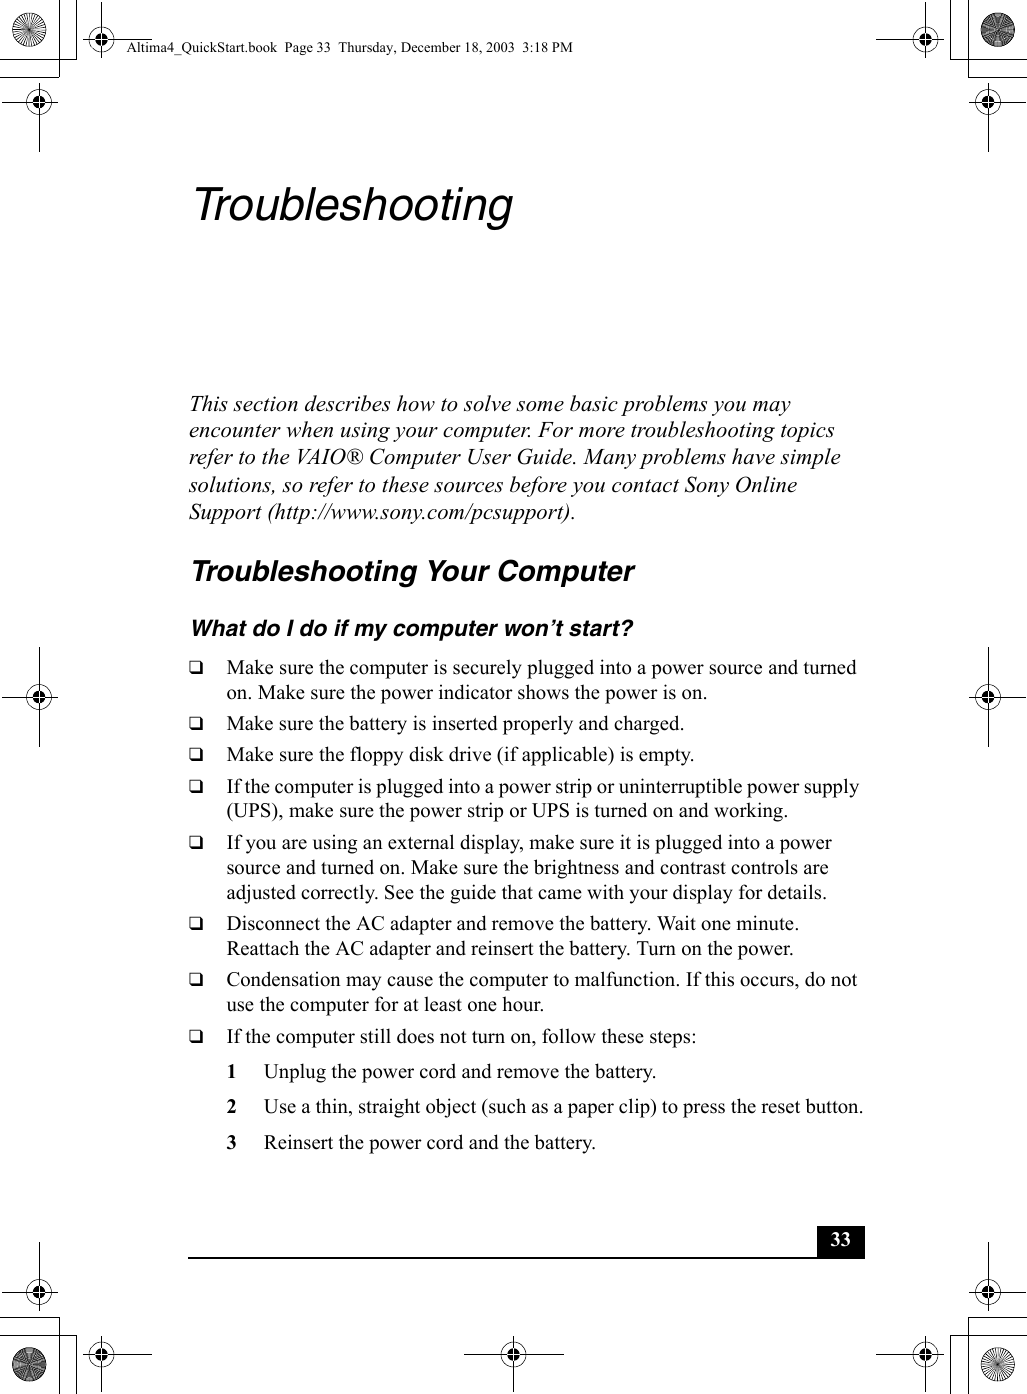 33TroubleshootingThis section describes how to solve some basic problems you may encounter when using your computer. For more troubleshooting topics refer to the VAIO® Computer User Guide. Many problems have simple solutions, so refer to these sources before you contact Sony Online Support (http://www.sony.com/pcsupport).Troubleshooting Your Computer What do I do if my computer won’t start?❑Make sure the computer is securely plugged into a power source and turned on. Make sure the power indicator shows the power is on.❑Make sure the battery is inserted properly and charged.❑Make sure the floppy disk drive (if applicable) is empty.❑If the computer is plugged into a power strip or uninterruptible power supply (UPS), make sure the power strip or UPS is turned on and working.❑If you are using an external display, make sure it is plugged into a power source and turned on. Make sure the brightness and contrast controls are adjusted correctly. See the guide that came with your display for details.❑Disconnect the AC adapter and remove the battery. Wait one minute. Reattach the AC adapter and reinsert the battery. Turn on the power.❑Condensation may cause the computer to malfunction. If this occurs, do not use the computer for at least one hour.❑If the computer still does not turn on, follow these steps:1Unplug the power cord and remove the battery.2Use a thin, straight object (such as a paper clip) to press the reset button.3Reinsert the power cord and the battery.Altima4_QuickStart.book  Page 33  Thursday, December 18, 2003  3:18 PM